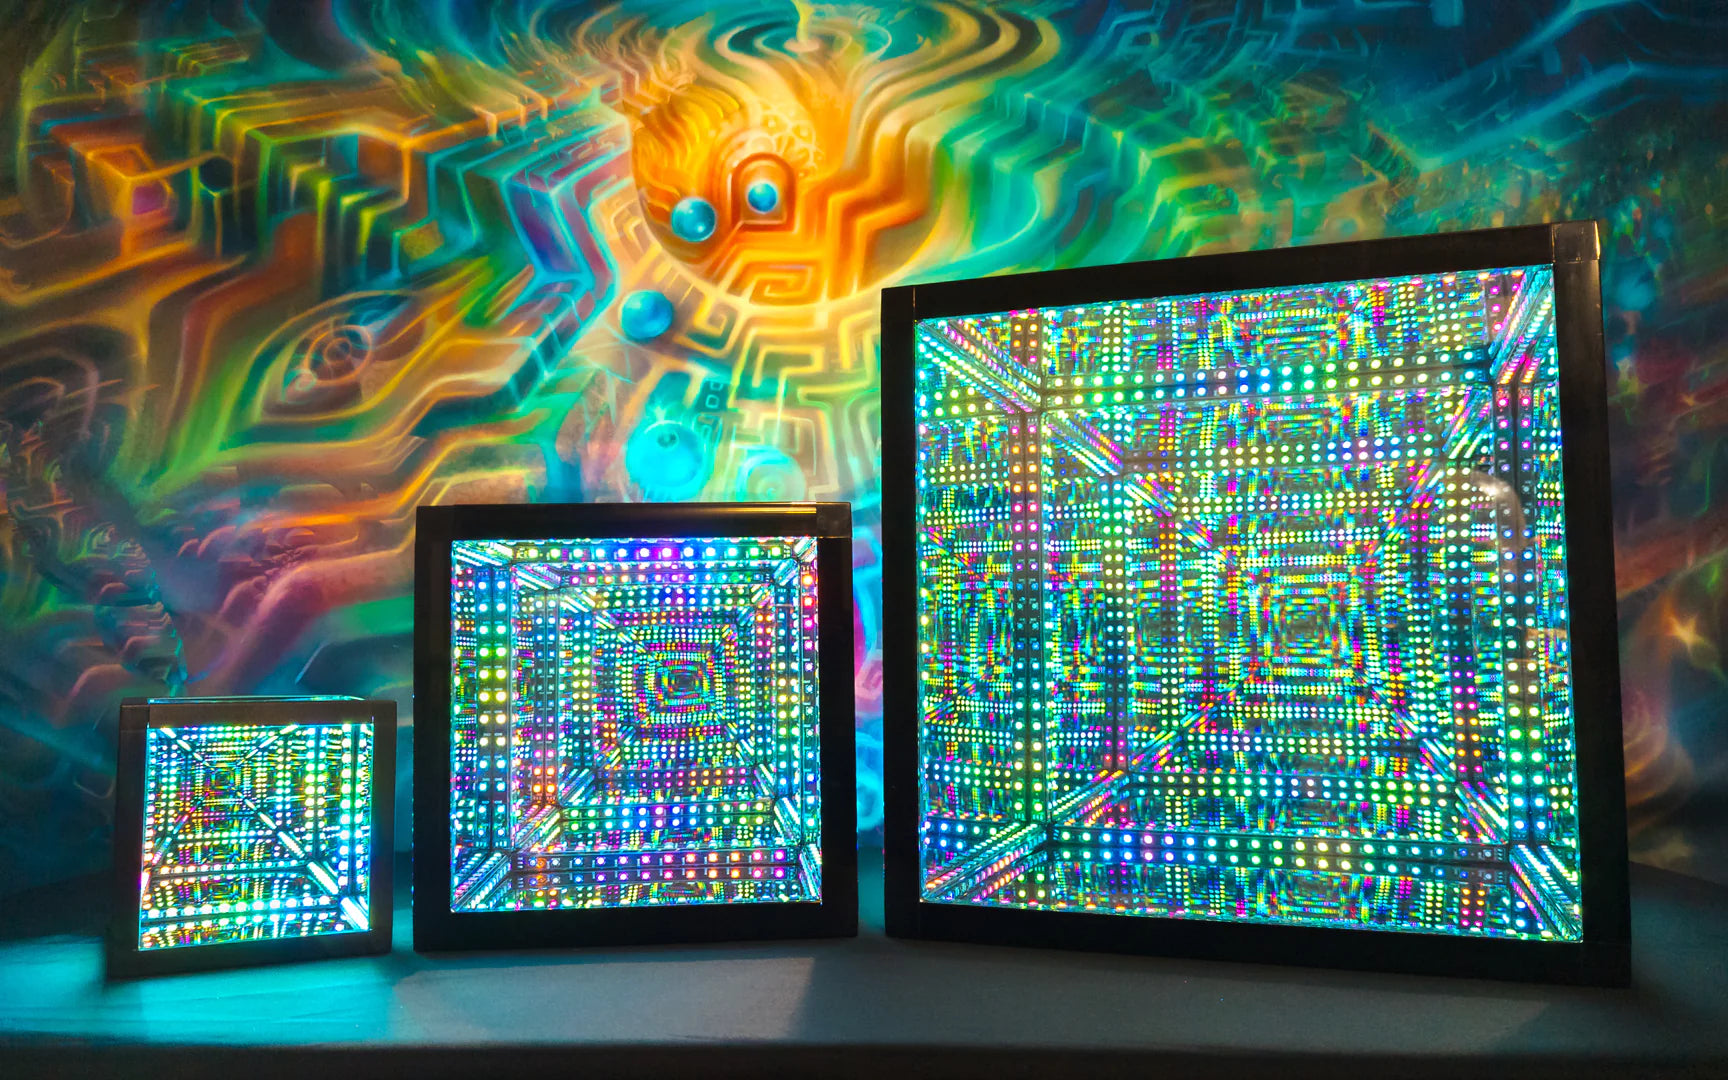 Three psychedelic art pieces in front of a colorful wall illuminated by the best Christmas lights.